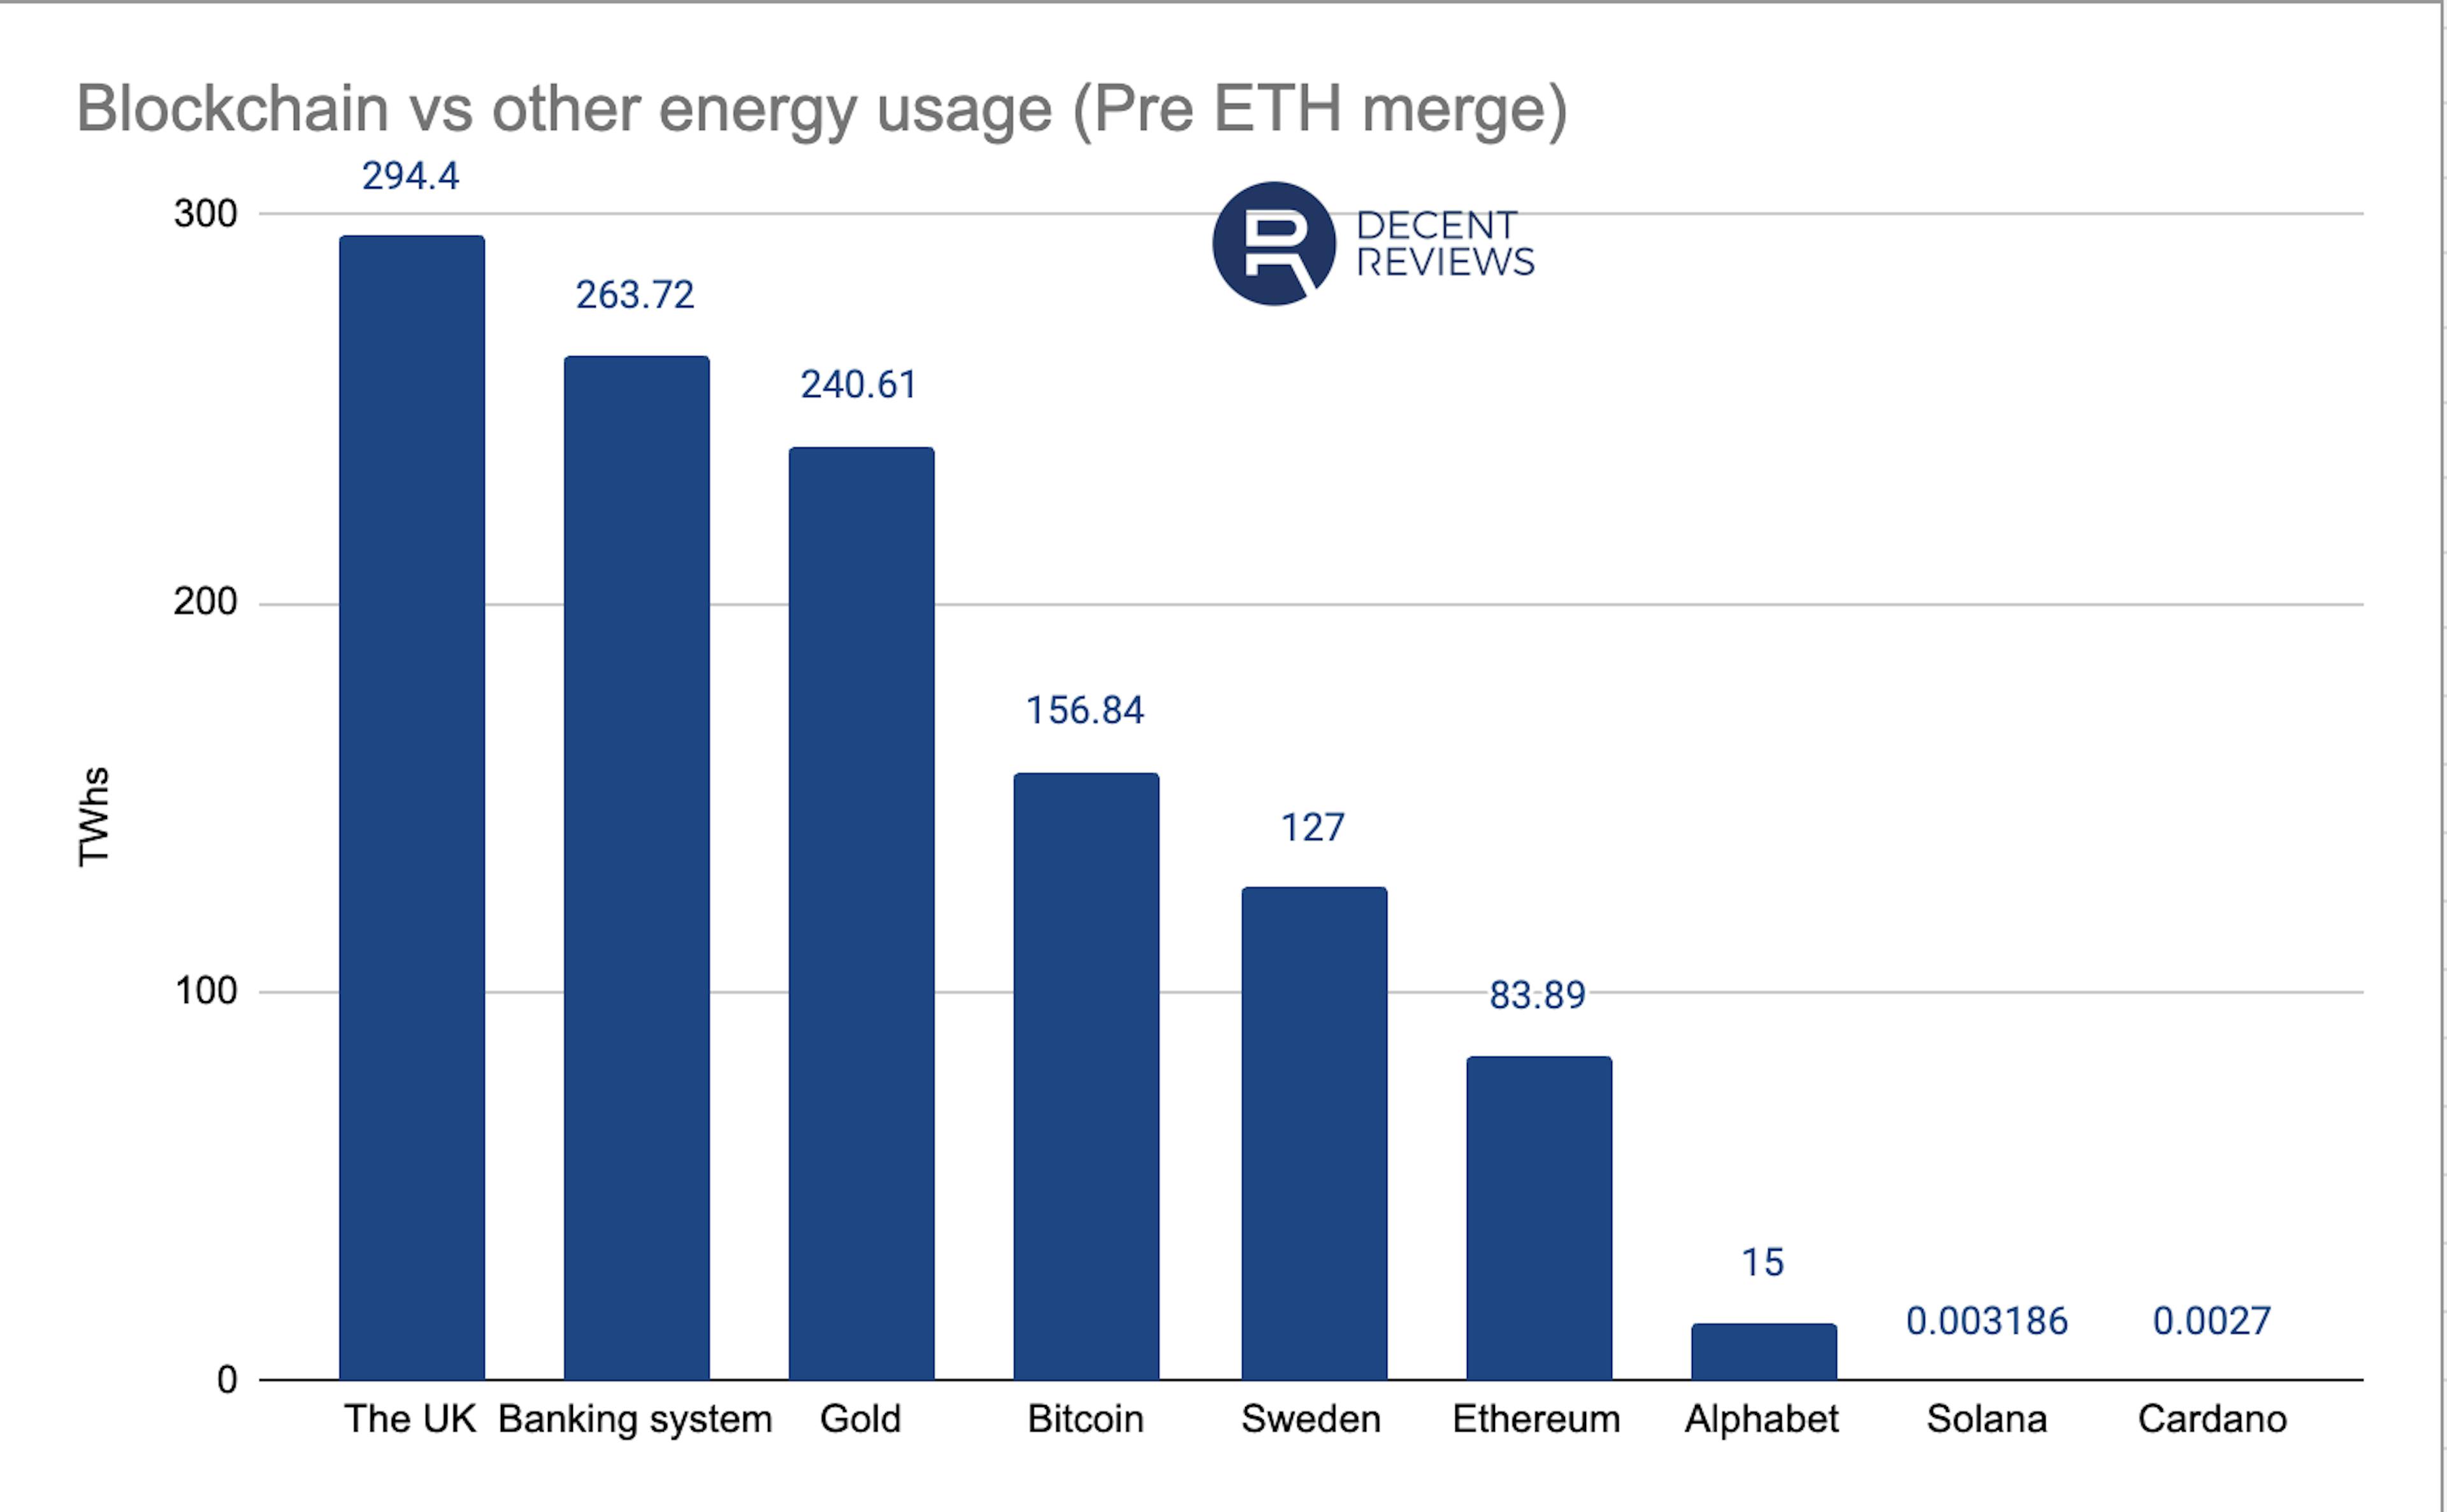 Bitcoin and Ethereum vs other high energy usage services